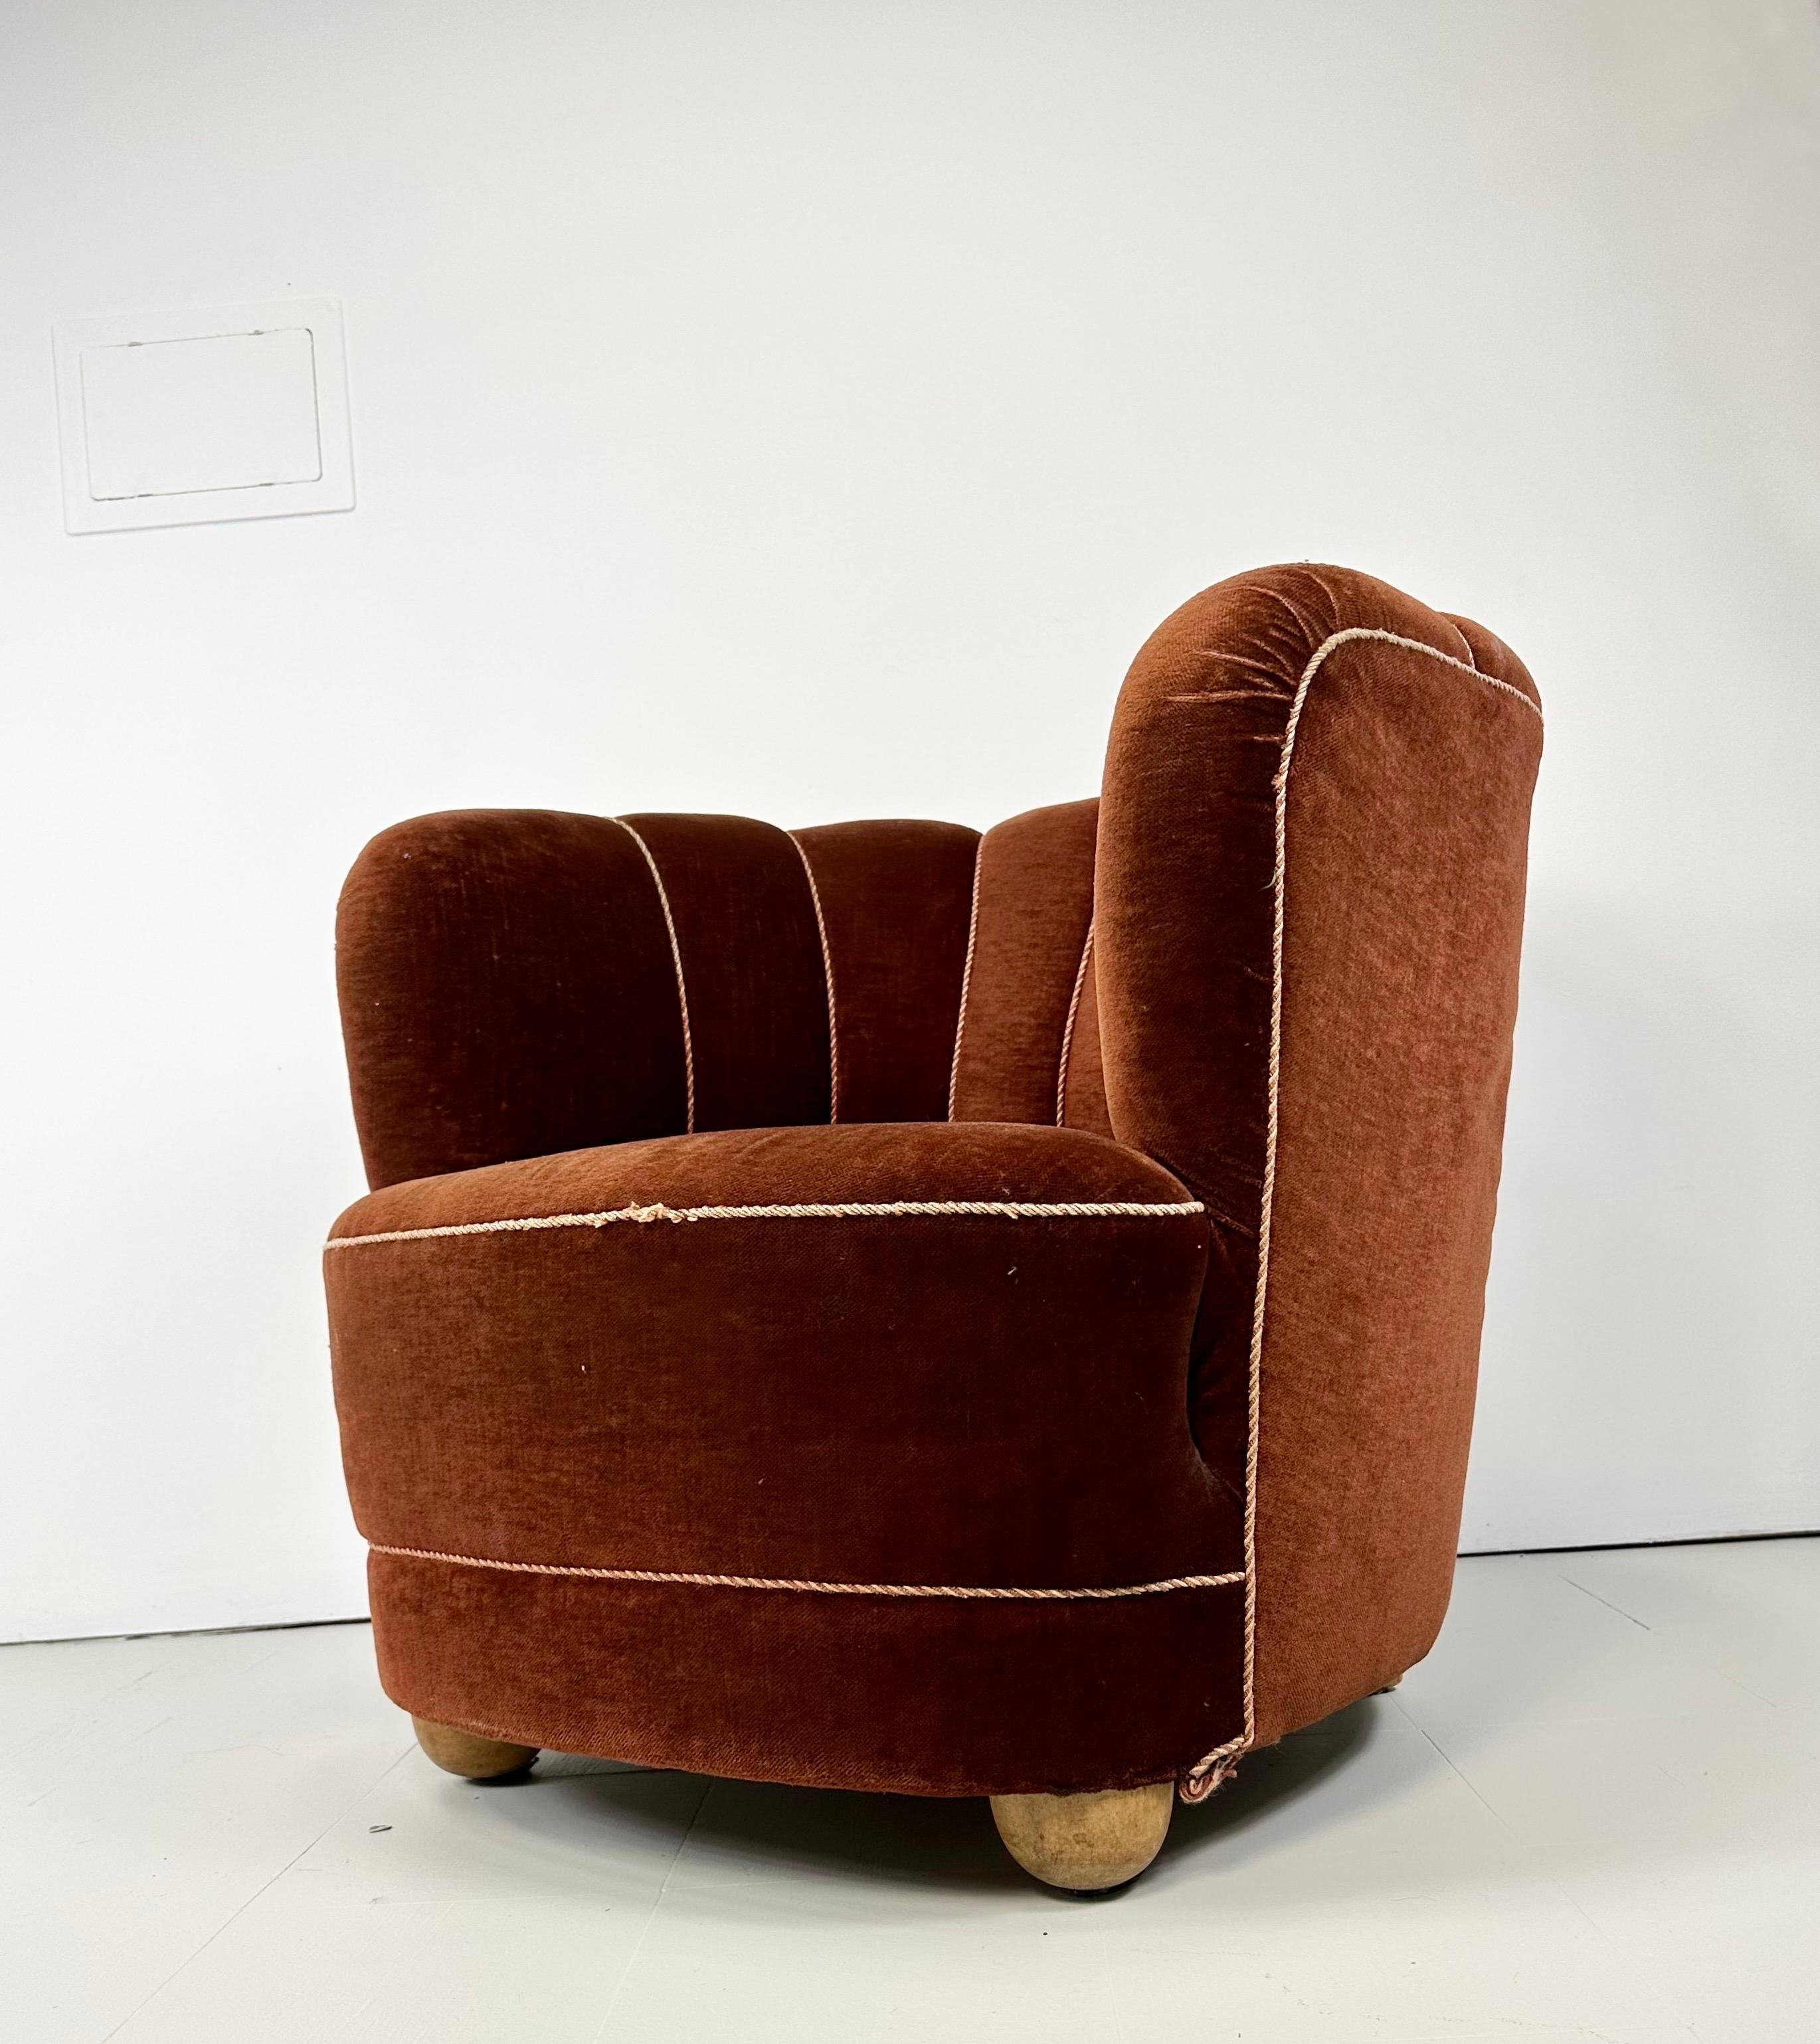 1940’s Danish Barrel Lounge Chair. Birch legs. Original Upholstery.
Denmark

This listing is for one chair. We do have a similar chair that was paired with this chair originally in a separate listing. We do show one image of the chairs together for